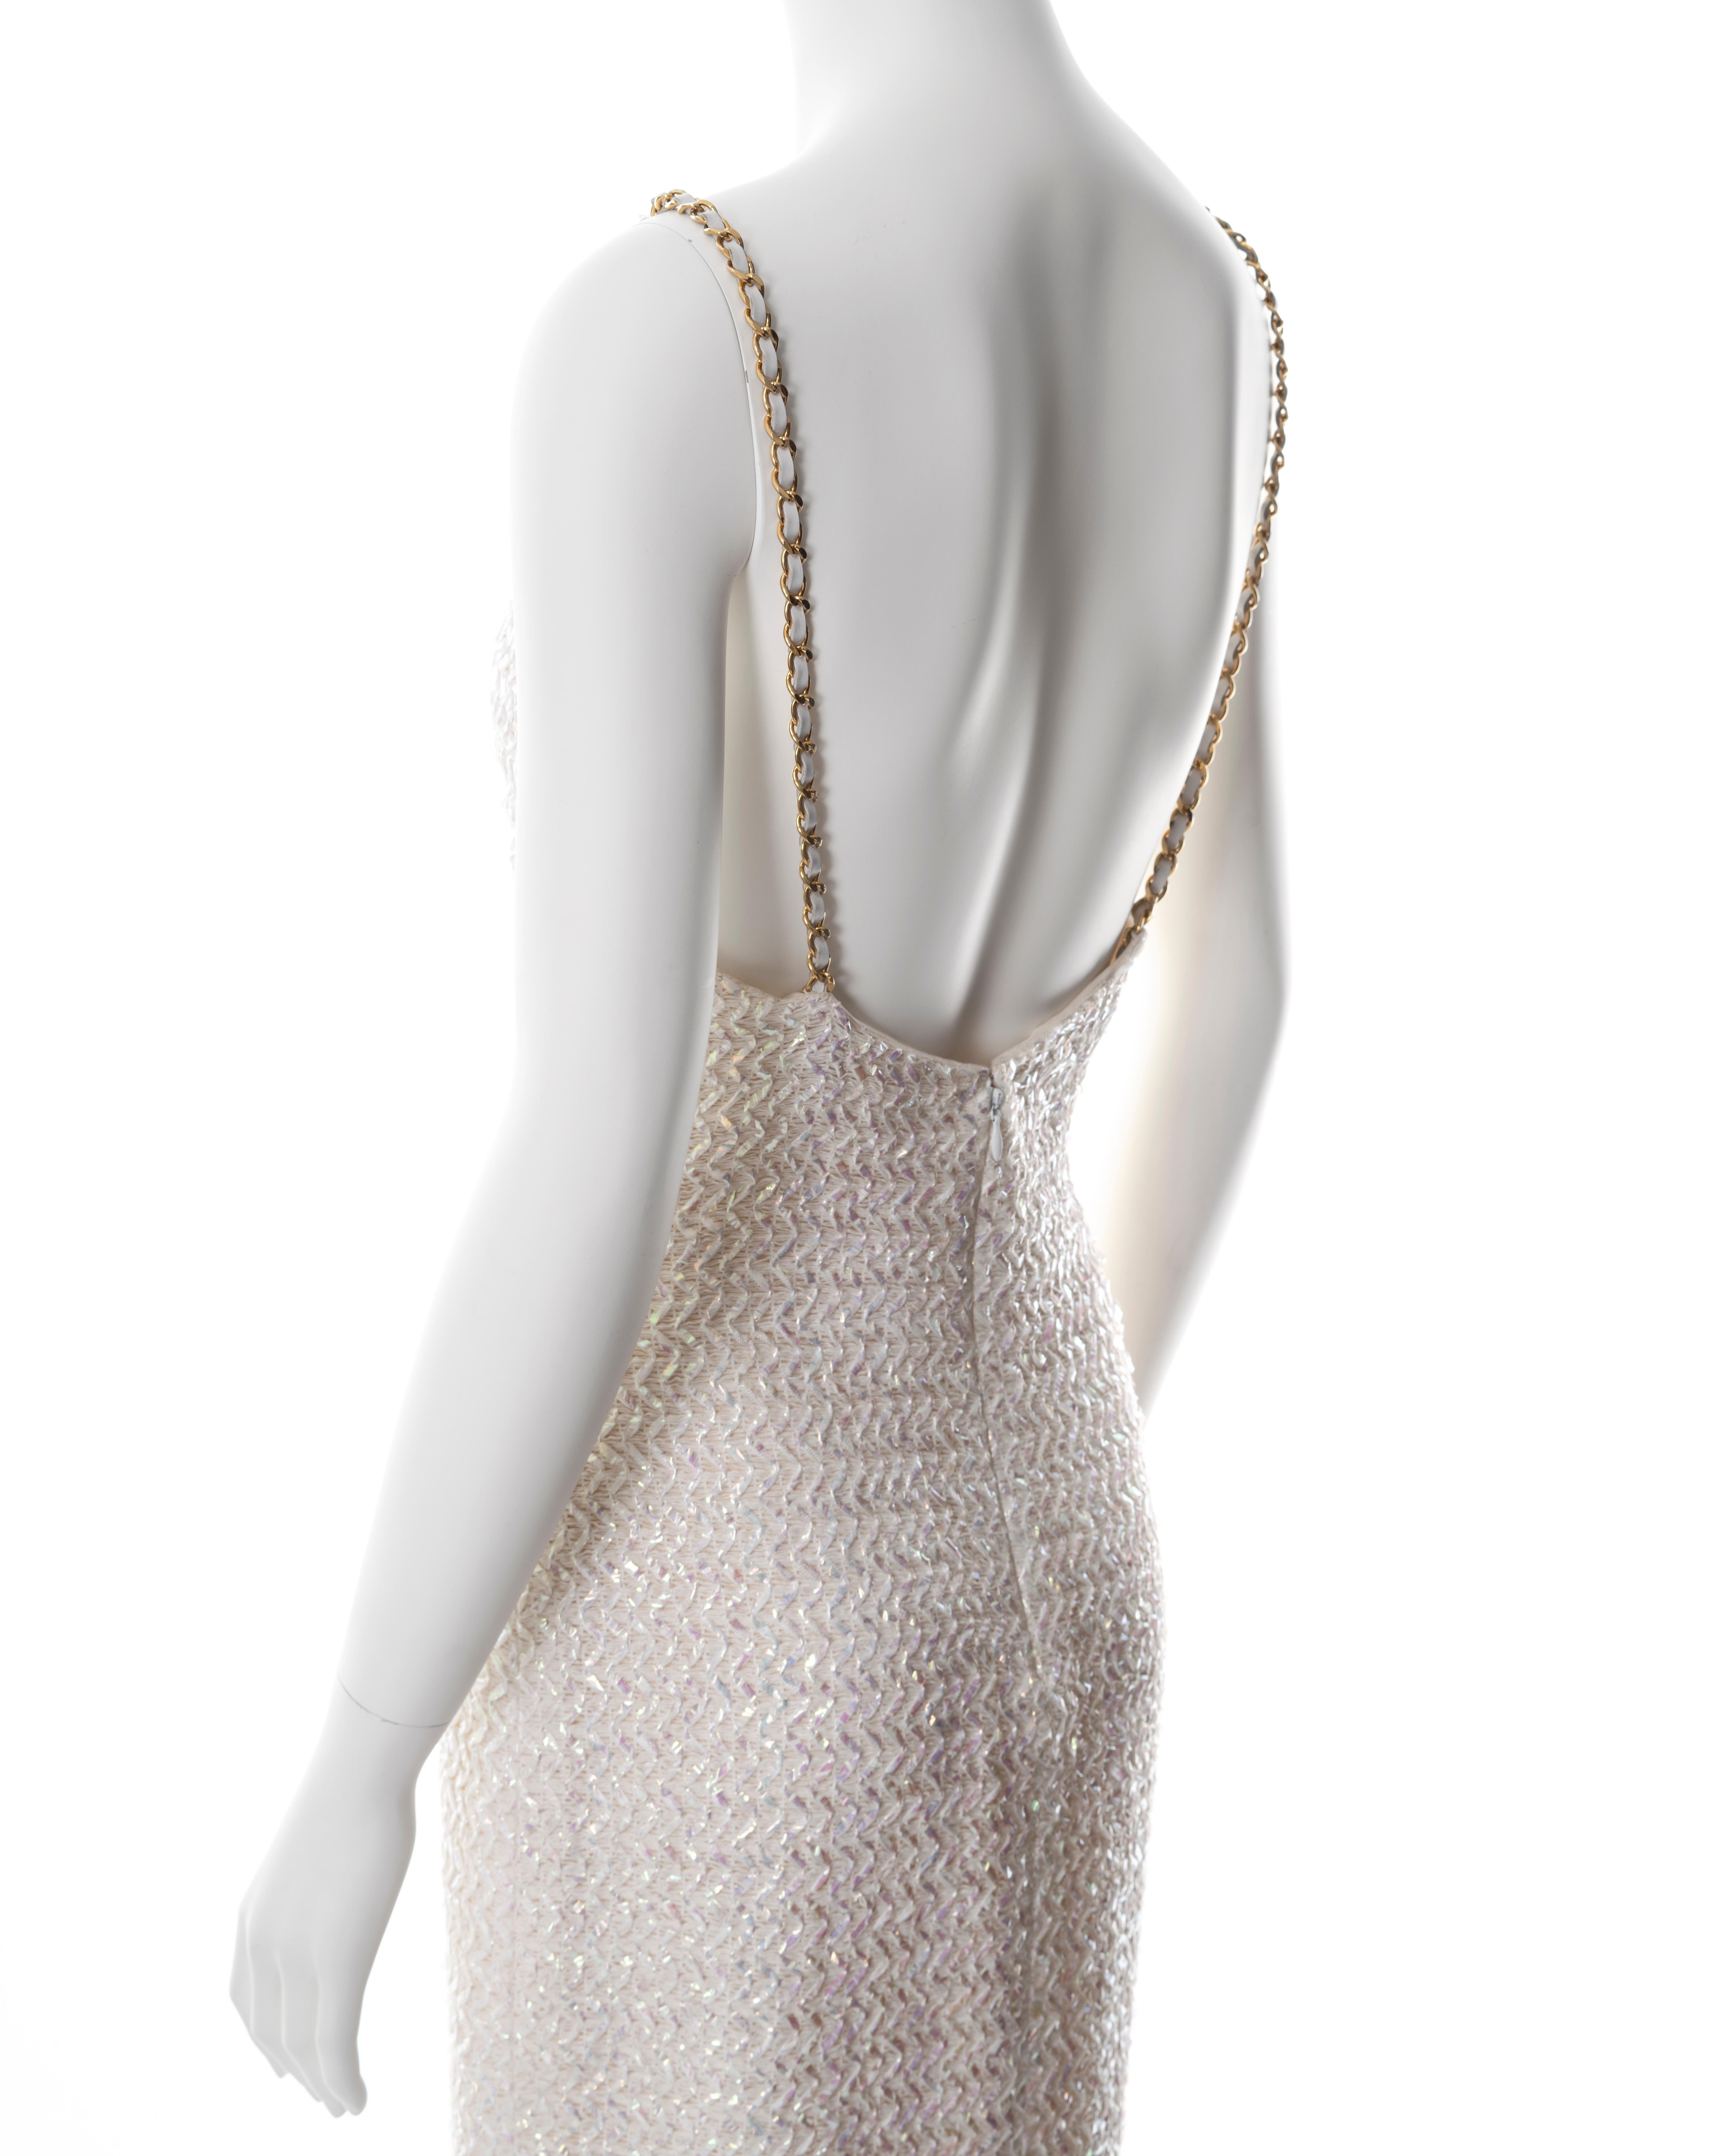 Chanel by Karl Lagerfeld white tweed sheath dress with chain straps, ss 1992 3